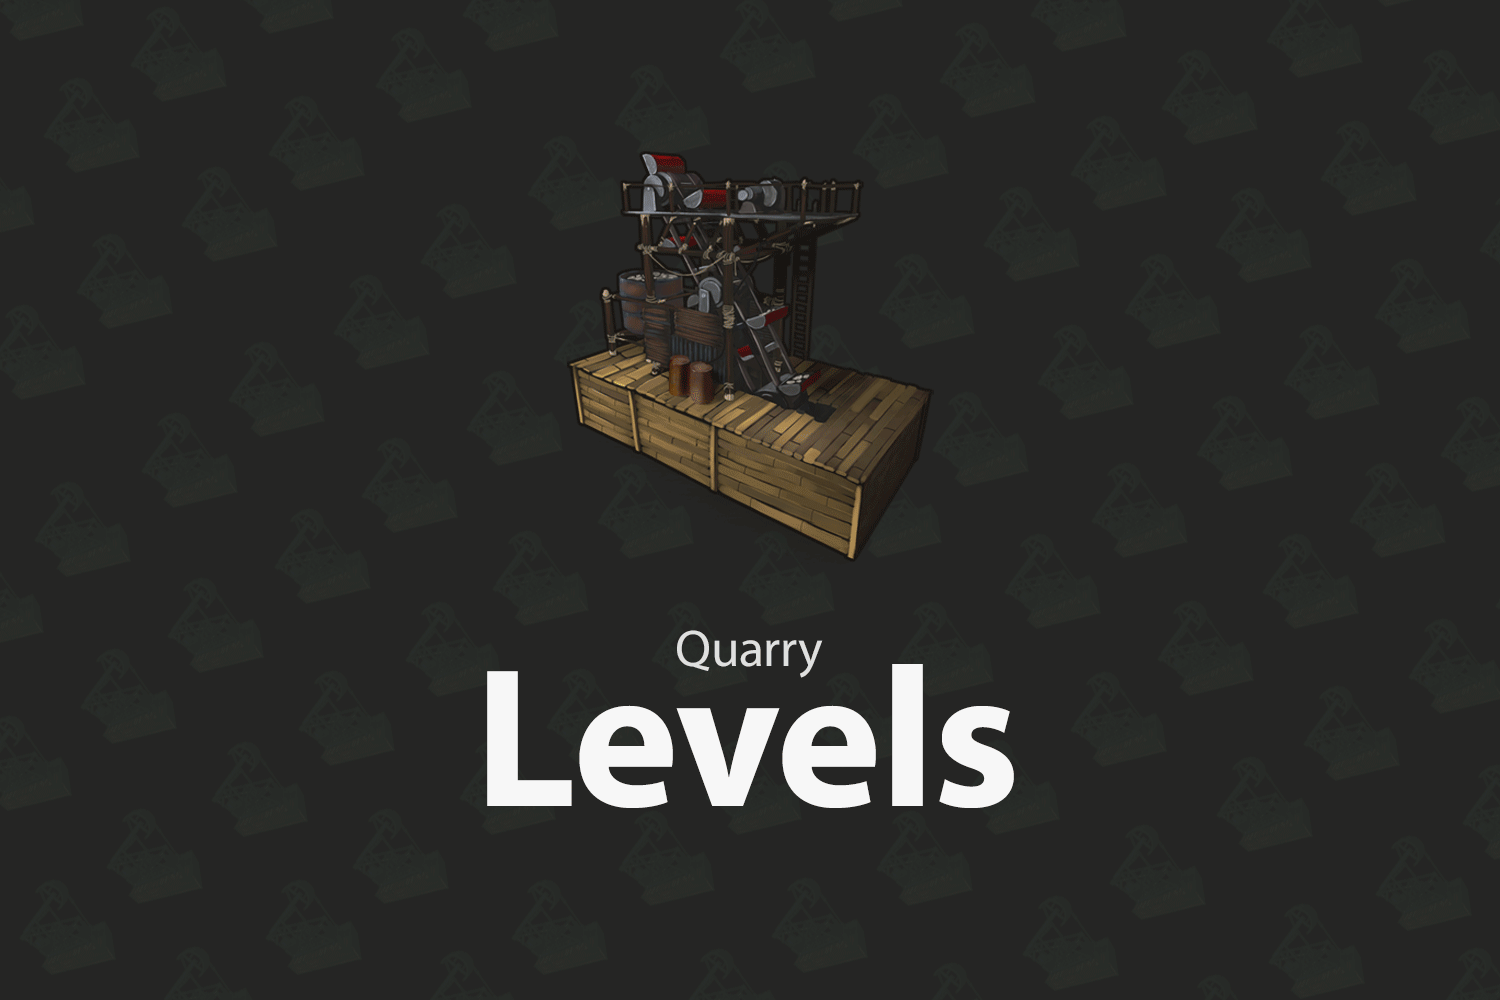 More information about "Quarry Levels"